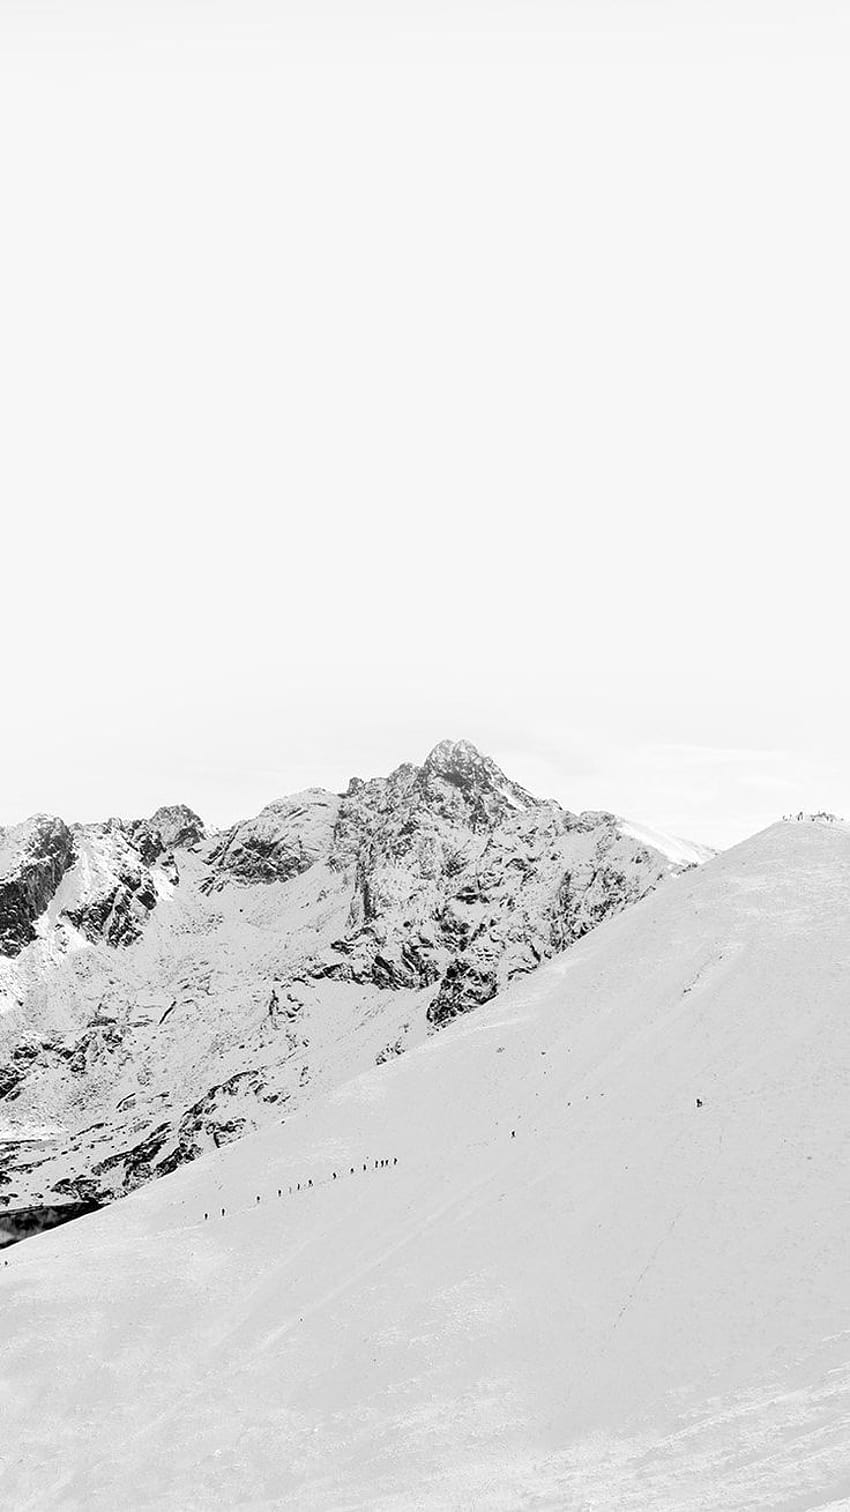 result for black and white mountains minimalist snow, minimilistic winter HD phone wallpaper